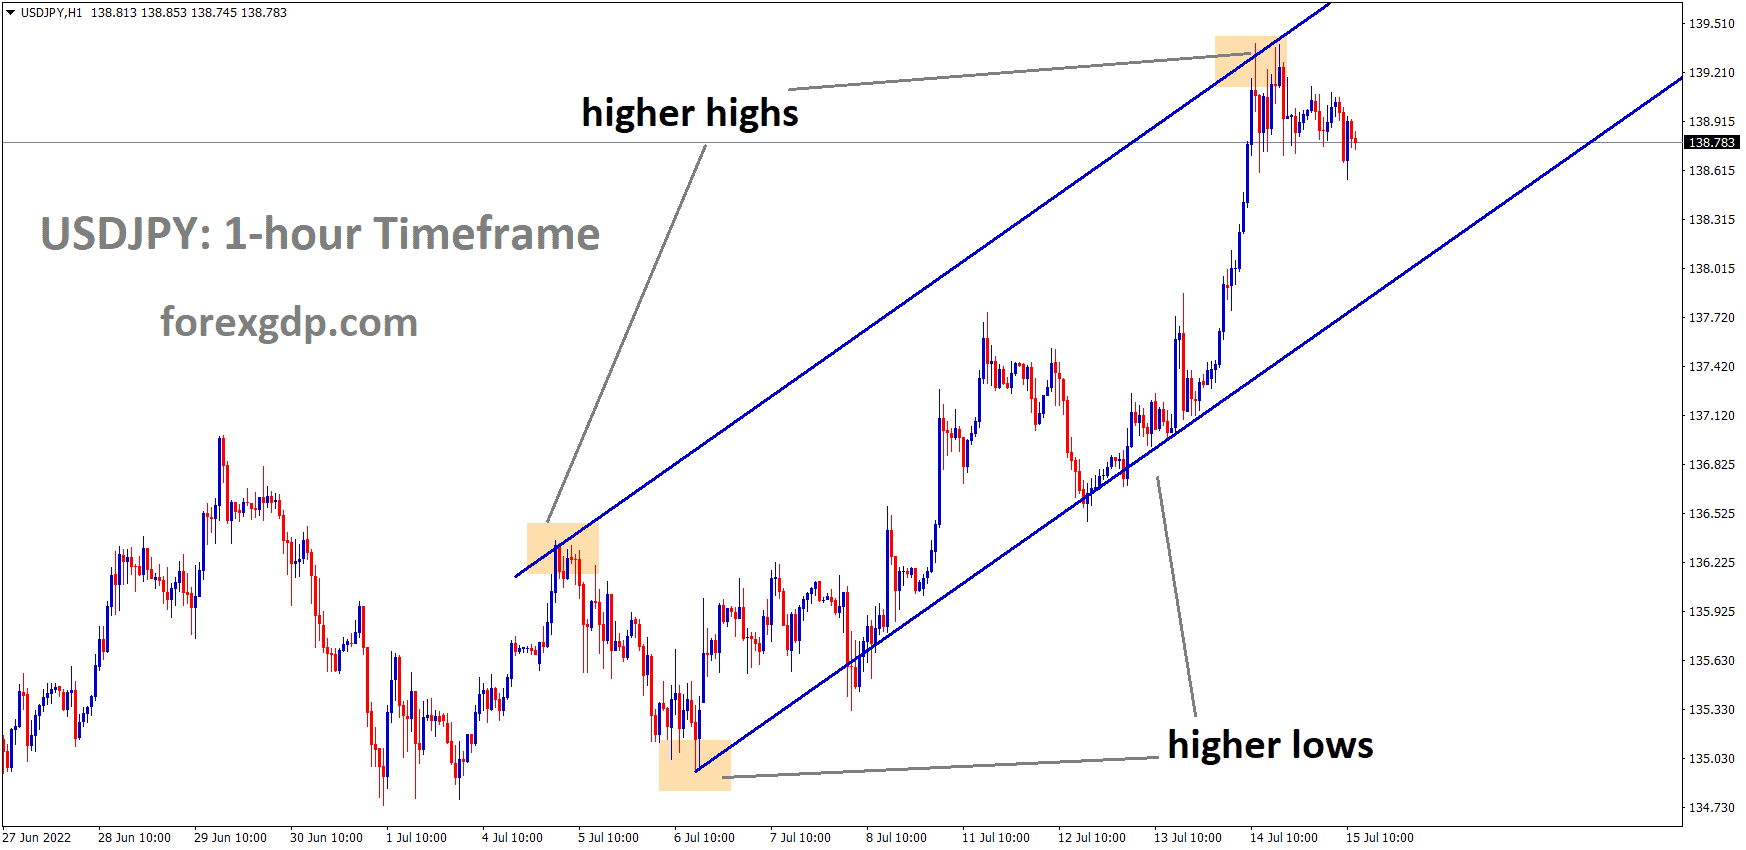 USDJPY is moving in an ascending channel and the market has fallen from the higher high area of the channel